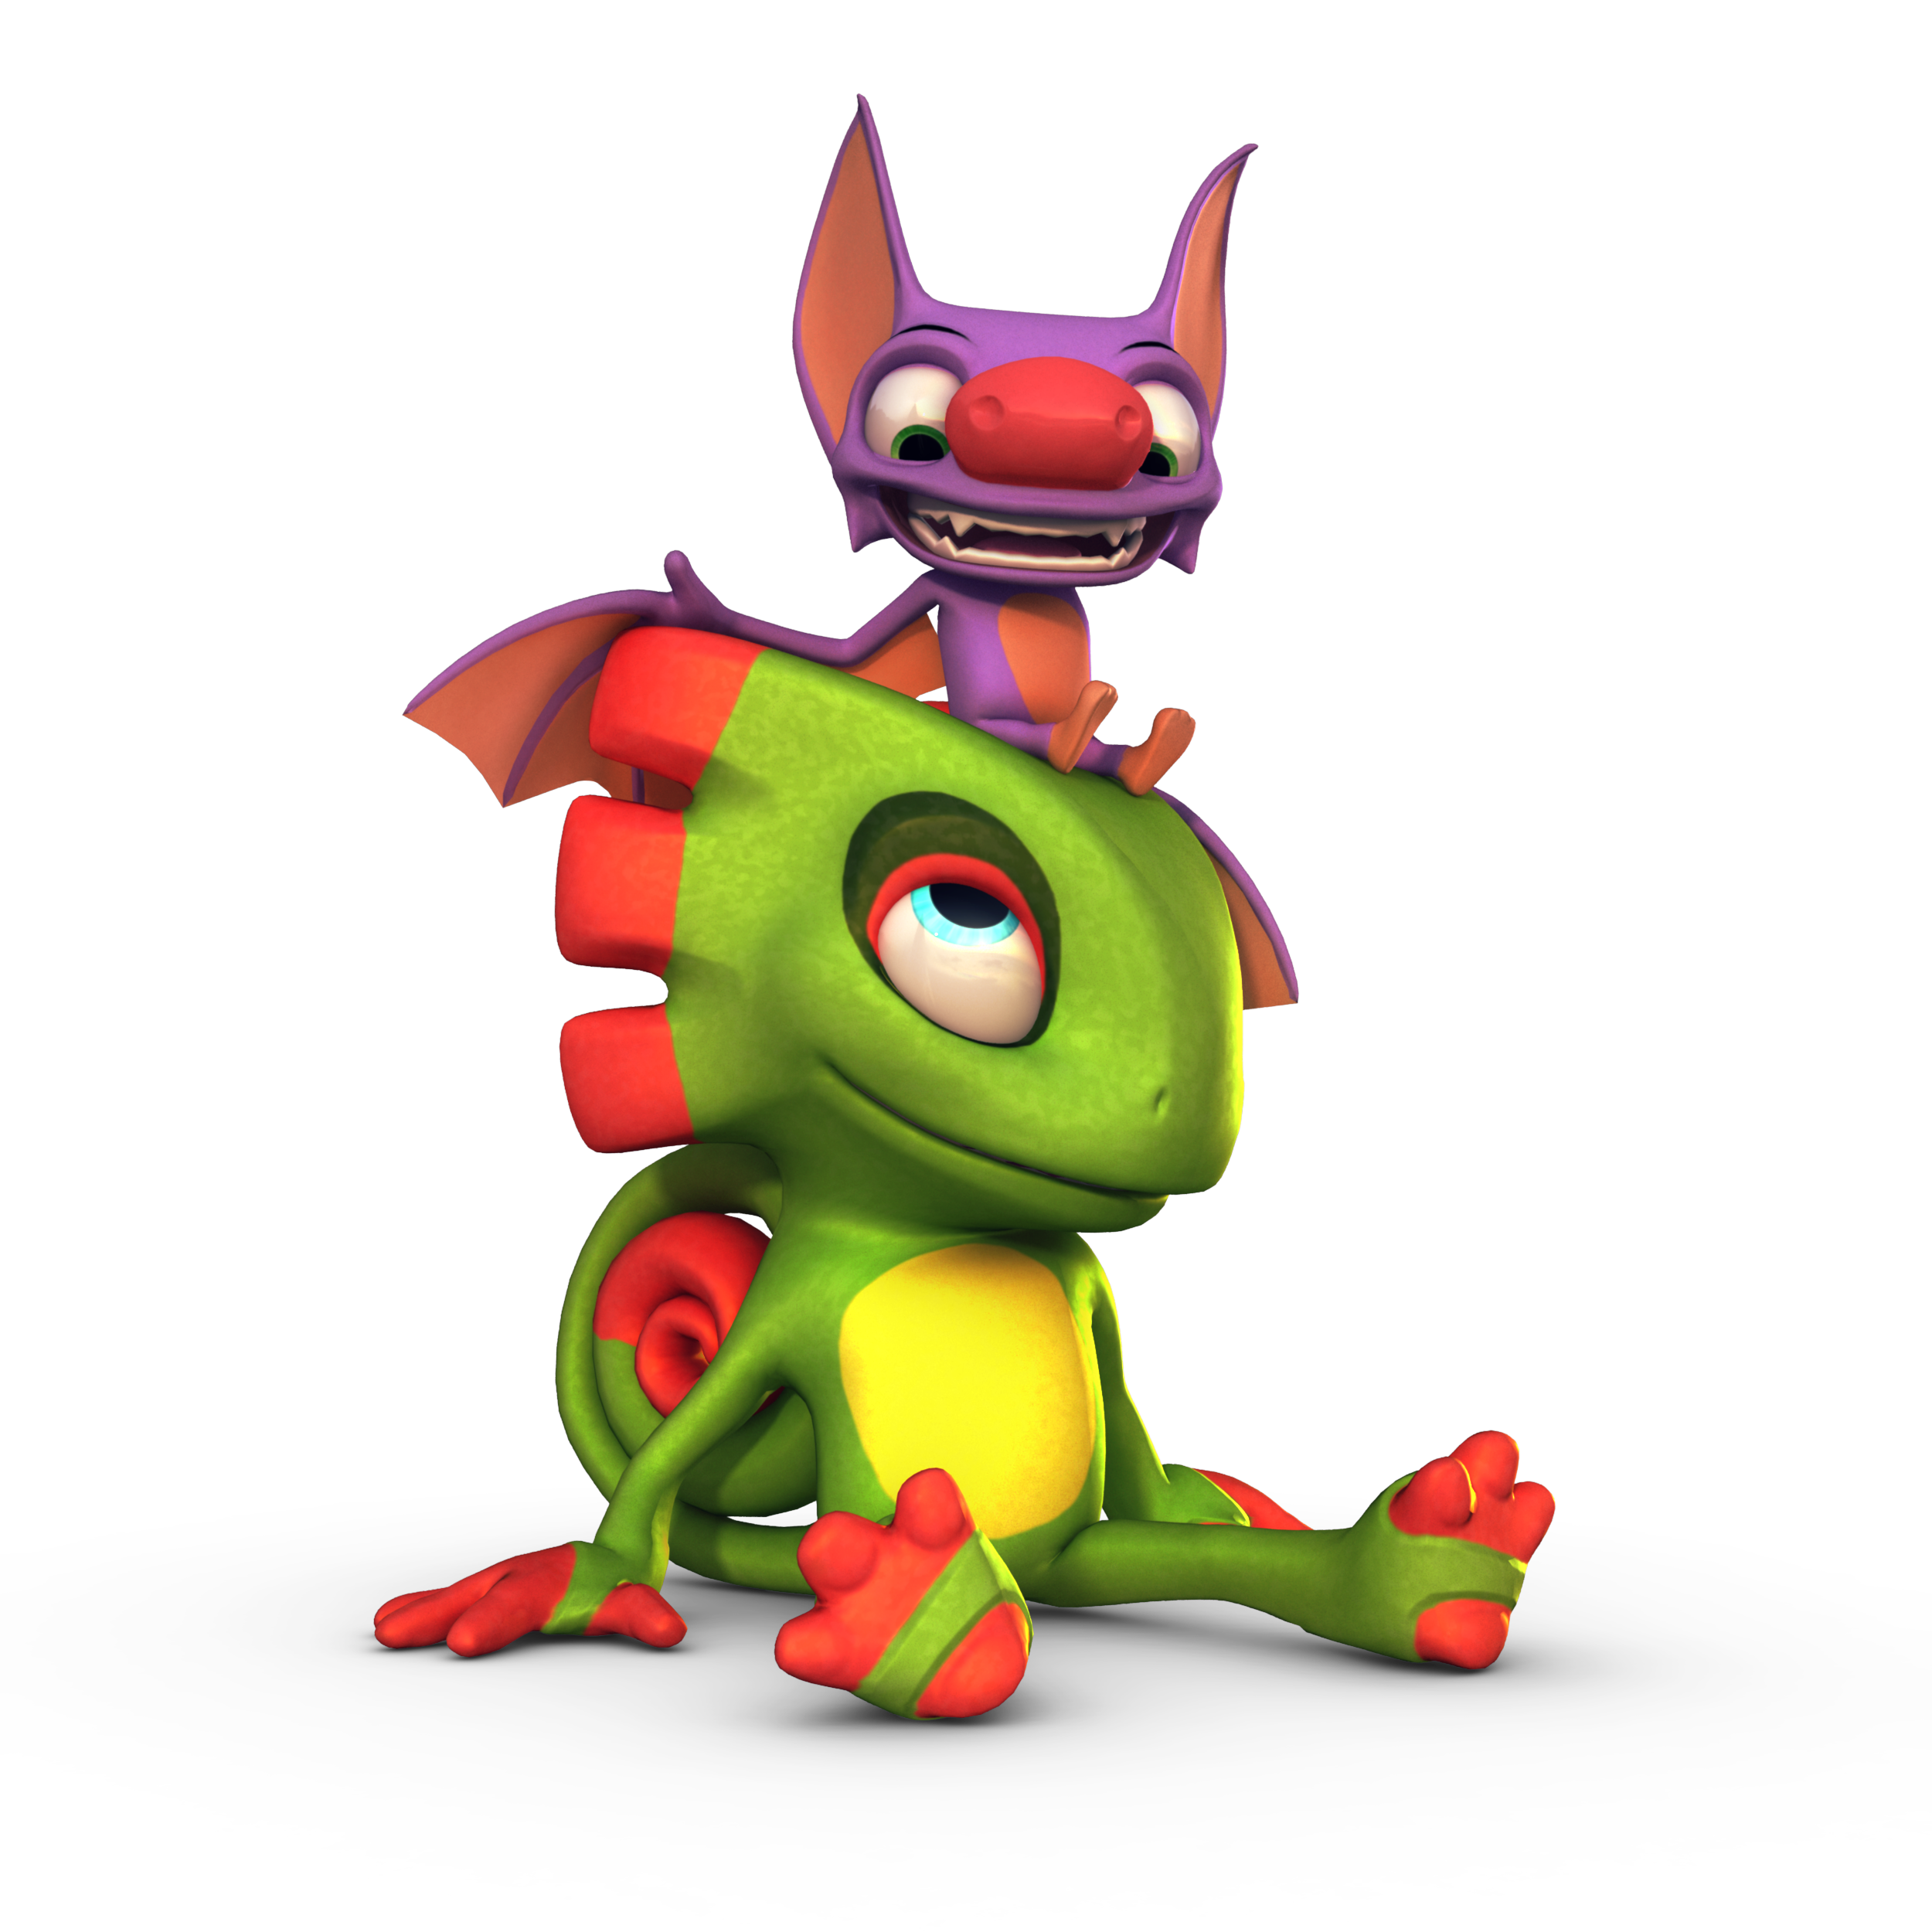 Yooka-Laylee Pics, Video Game Collection